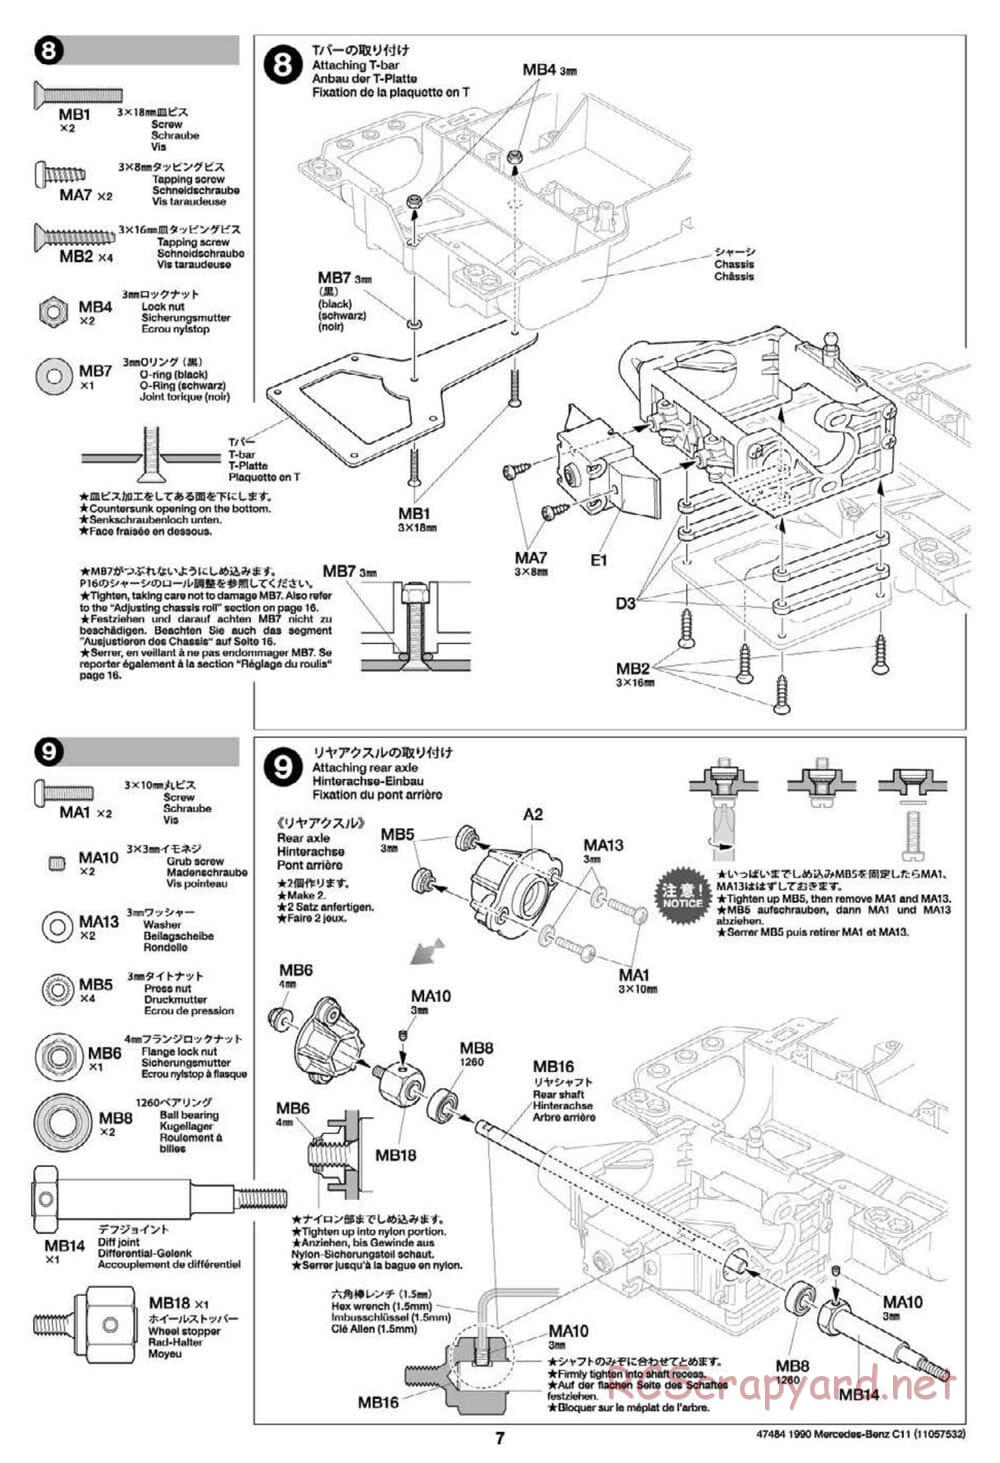 Tamiya - 1990 Mercedes-Benz C11 - Group-C Chassis - Manual - Page 7